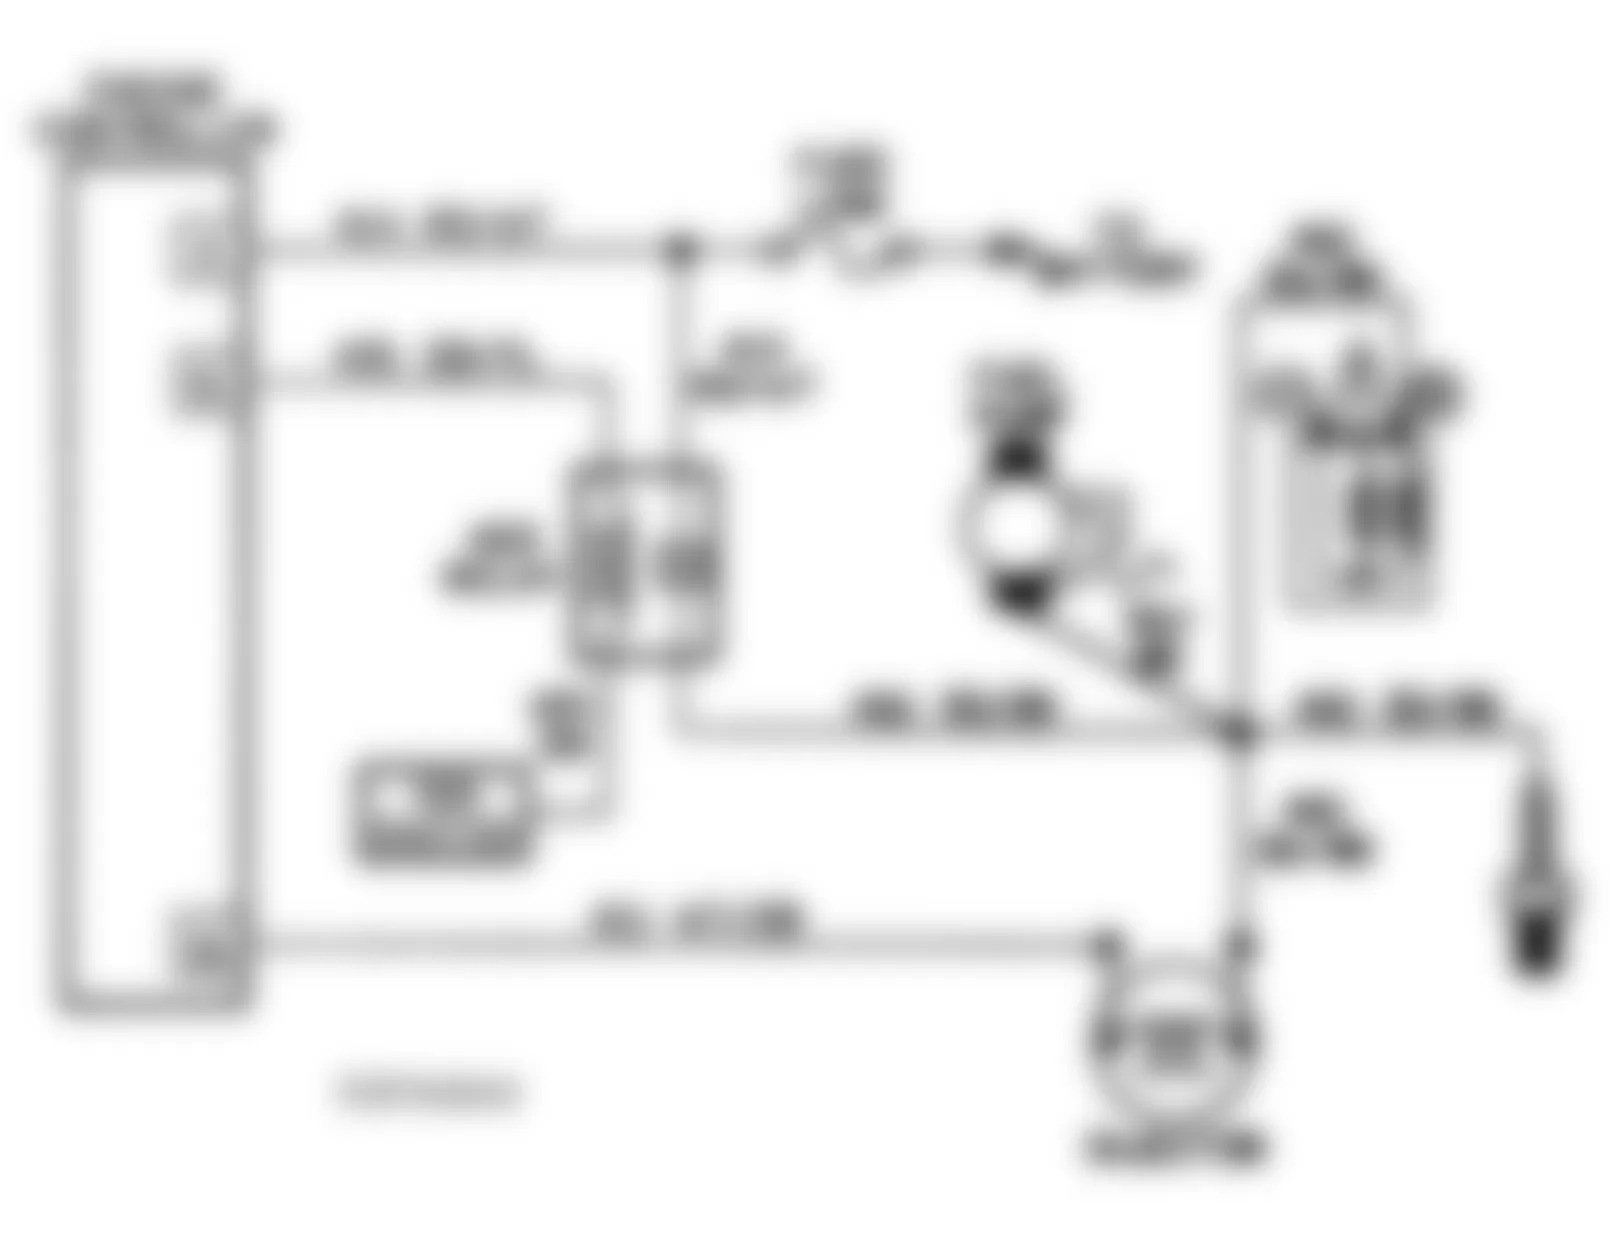 Chrysler LeBaron LX 1991 - Component Locations -  Test NS-10A Code 42, Circuit Diagram.